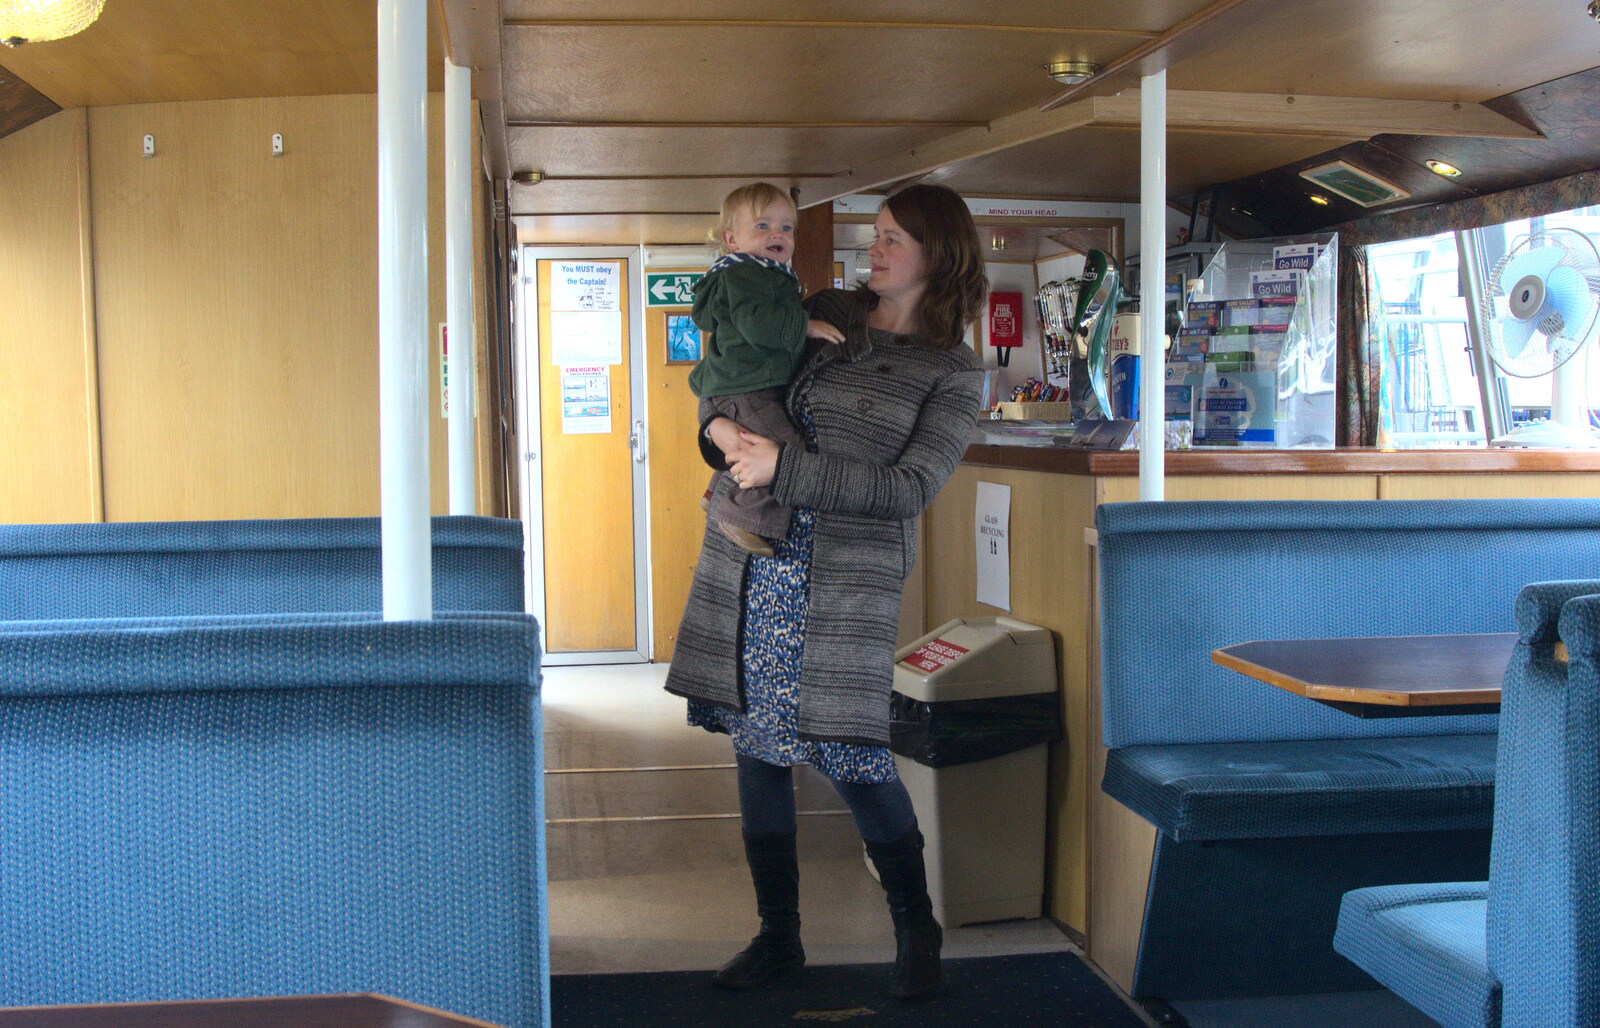 Harry and Isobel on the boat from A Trip on the Norfolk Broads, Wroxham, Norfolk - 25th May 2013